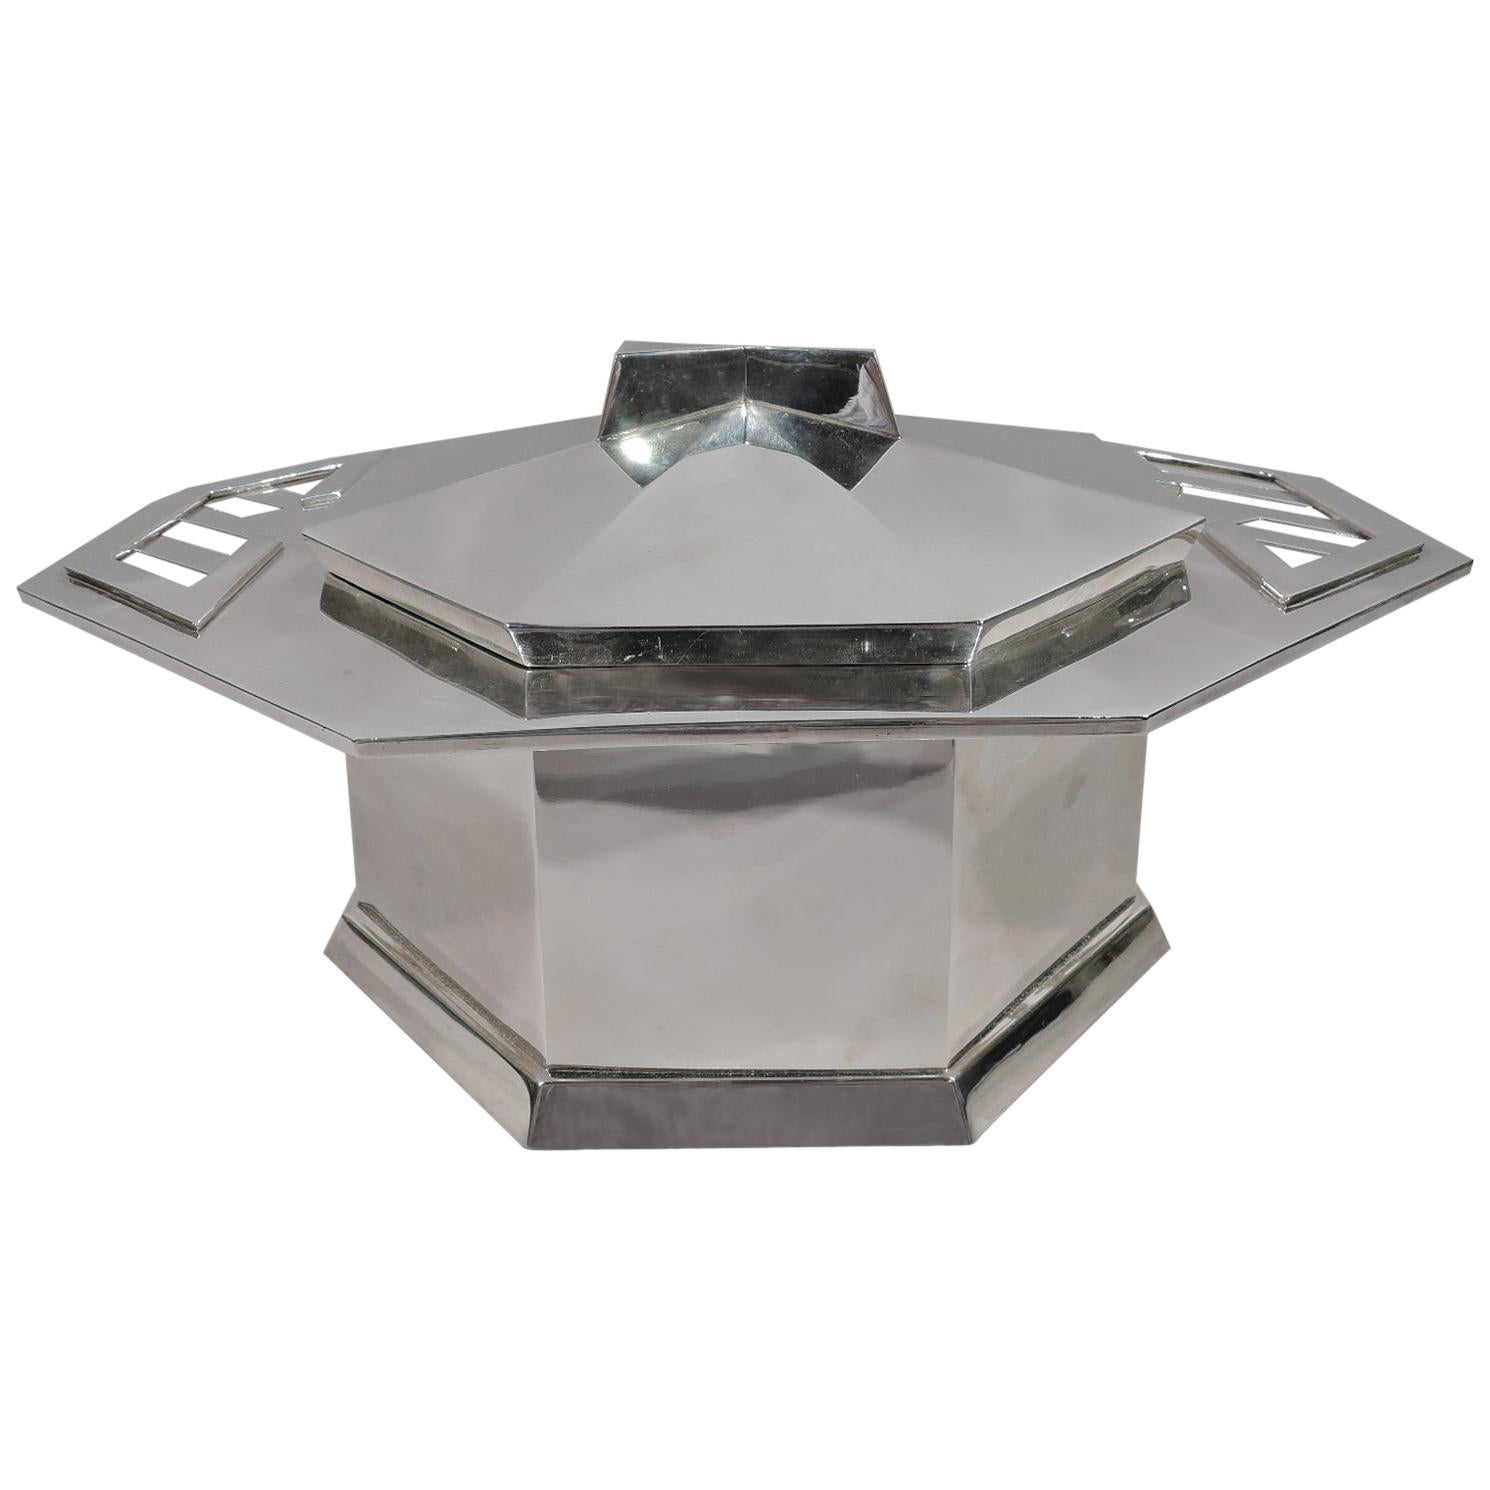 Tiffany Sterling Silver Covered Tureen Designed by Frank Lloyd Wright